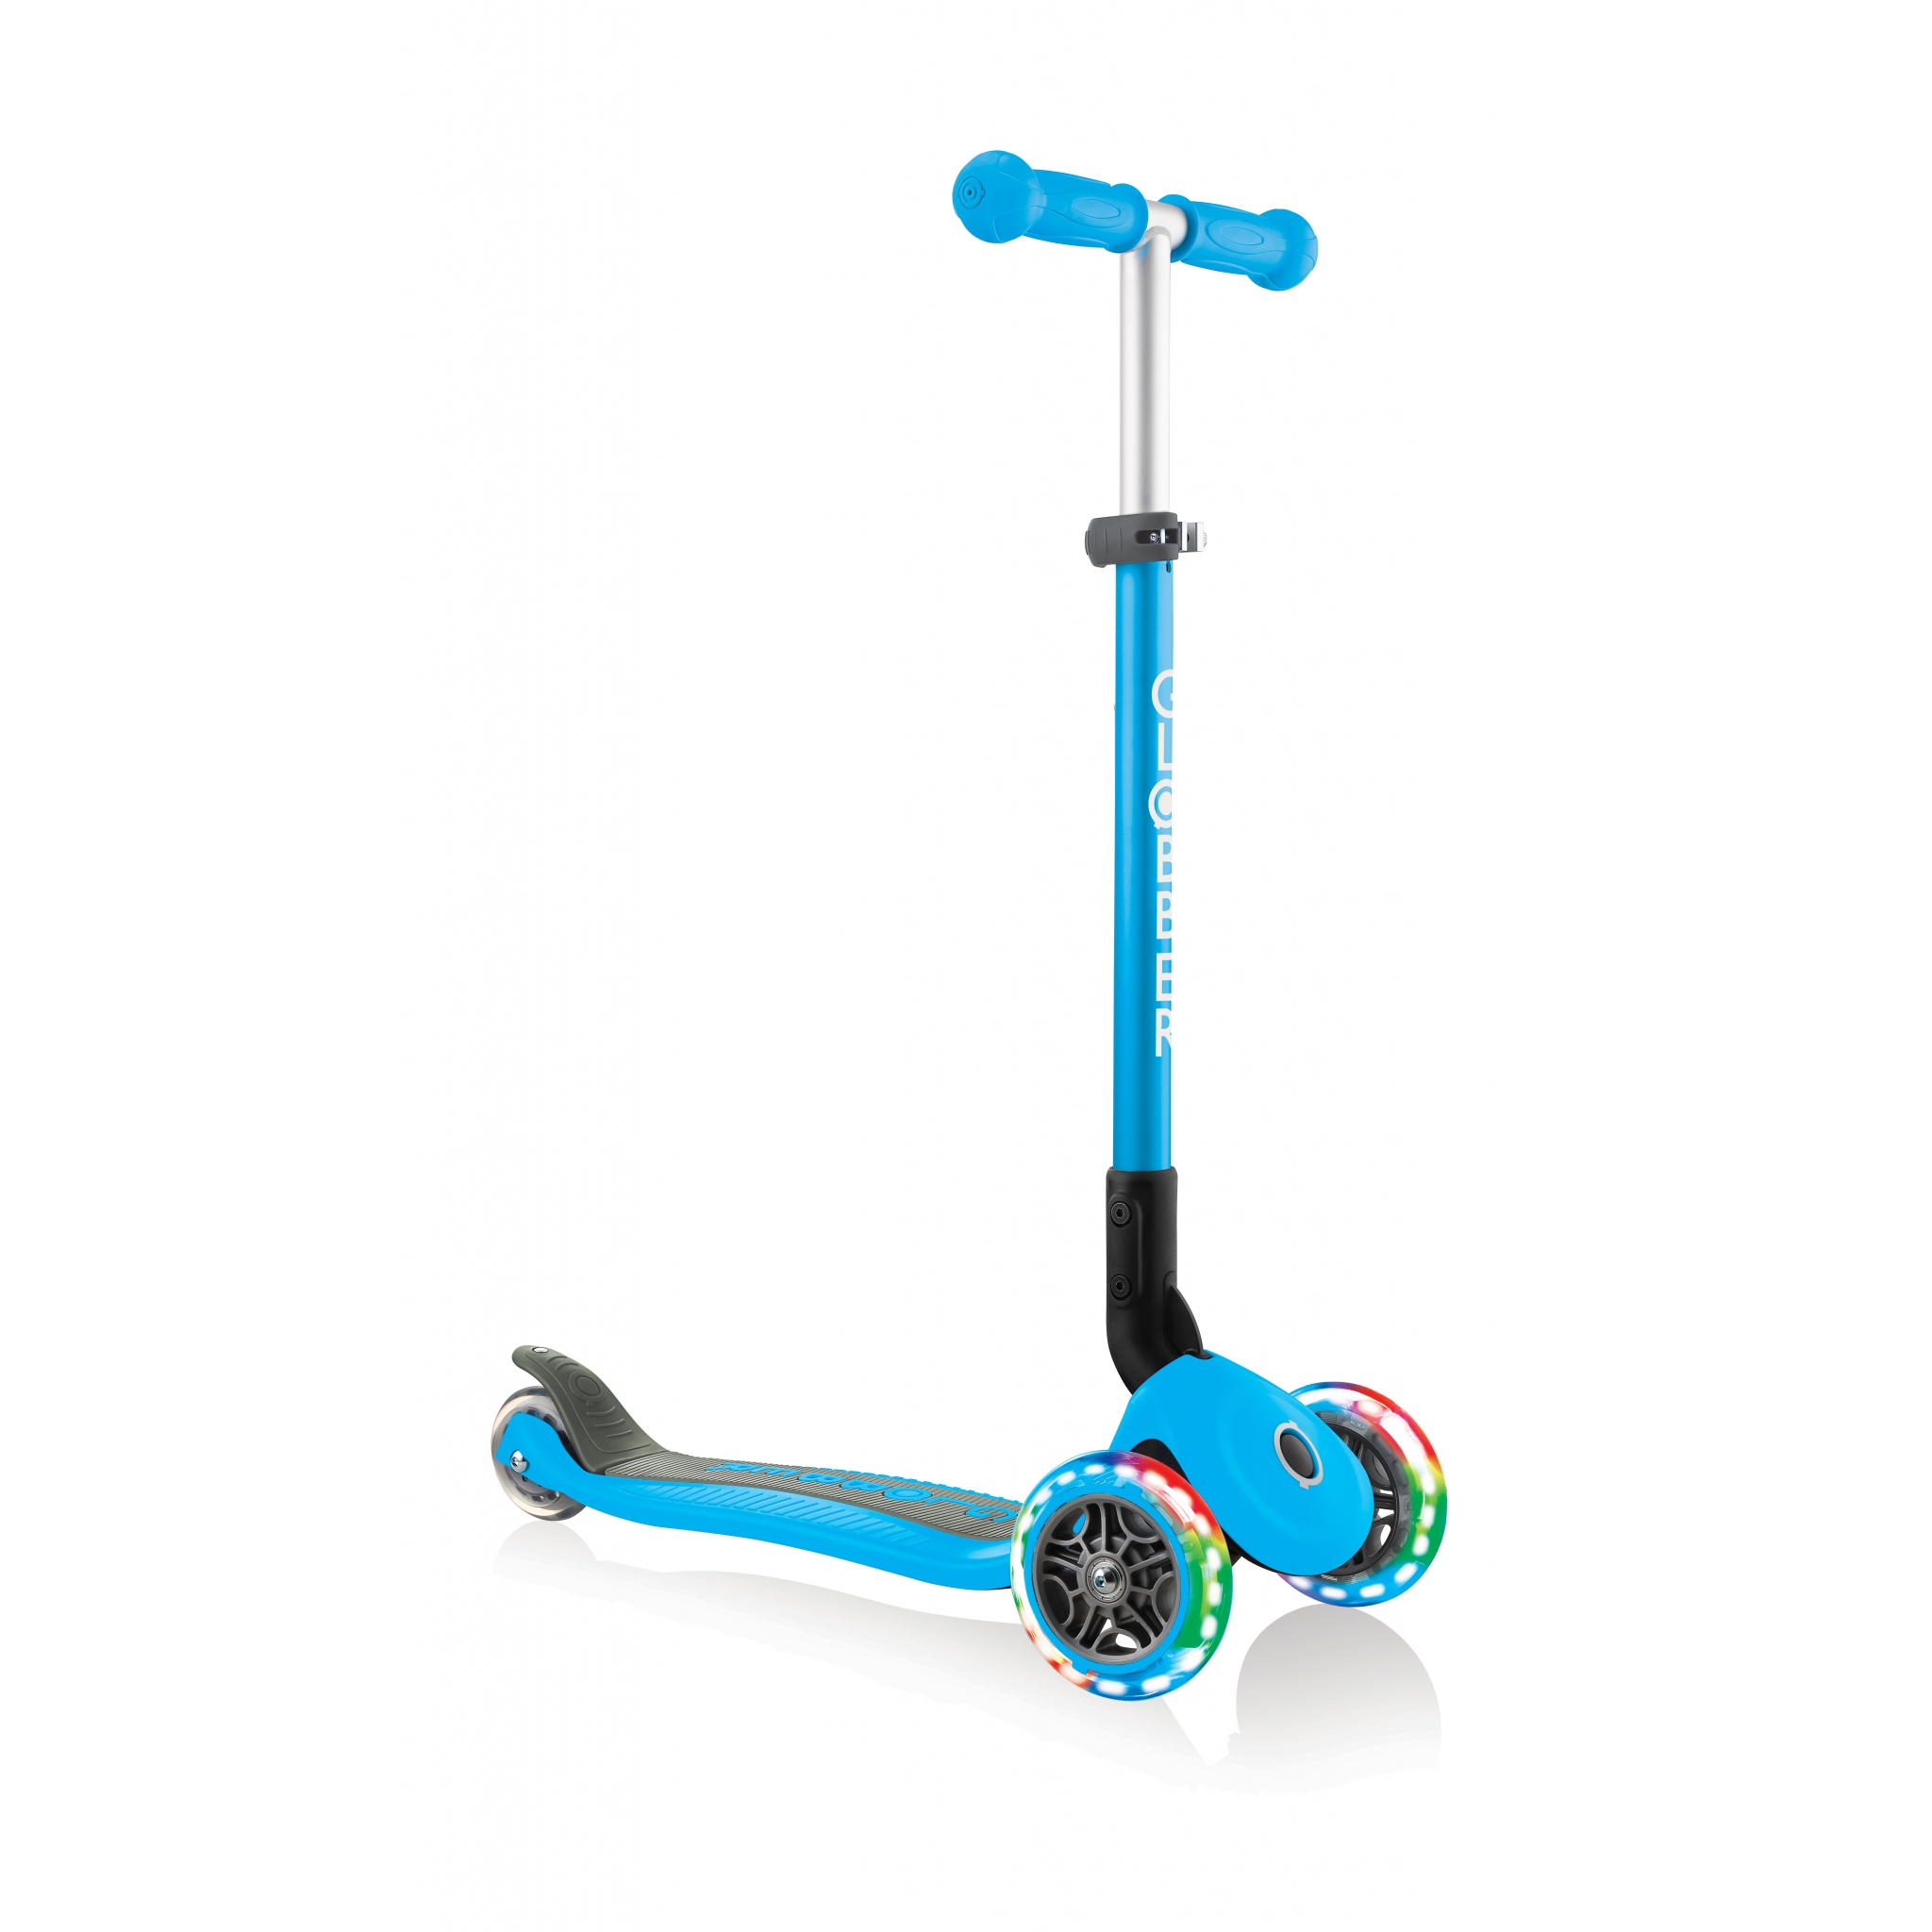 PRIMO-FOLDABLE-LIGHTS-3-wheel-foldable-scooter-light-up-scooter-for-kids-sky-blue 4